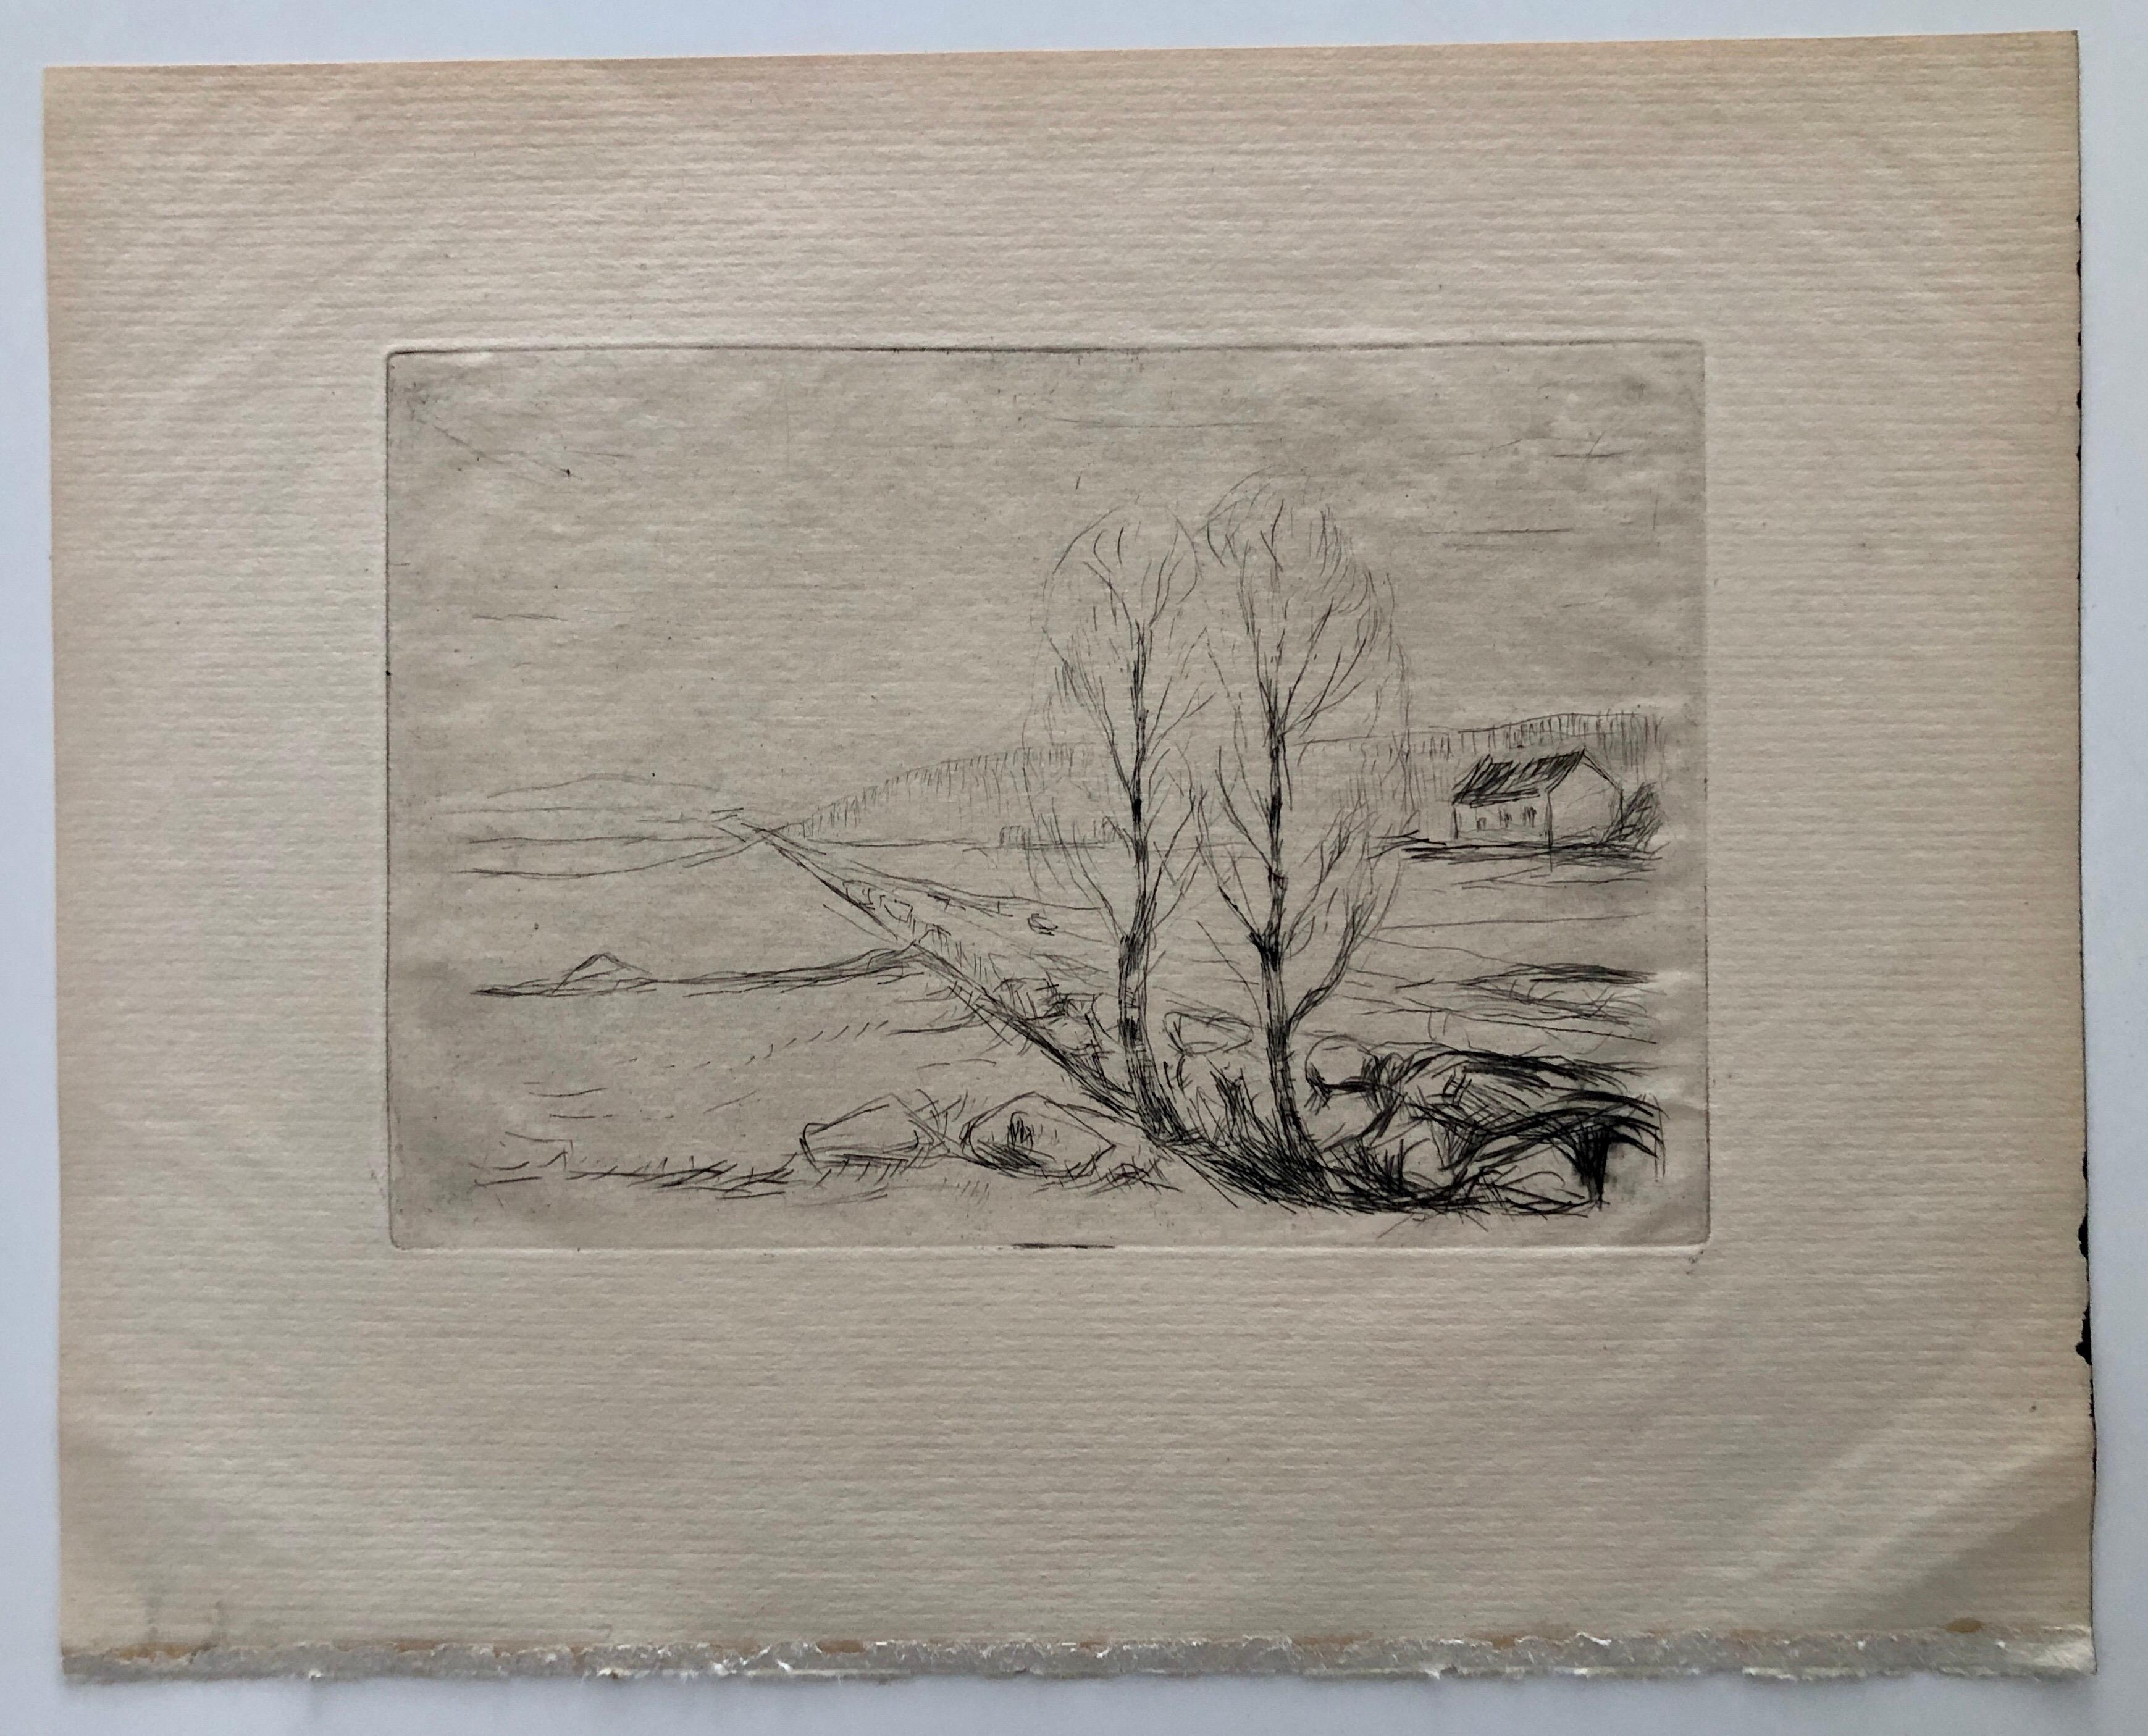 Original drypoint etching. Norwegian landscape with tree trunks, rocks, sky and cottage. 
Catalogue reference: Schiefler 268. Willoch catalogue entry 139. Published in Berlin by Paul Cassirer.

Edvard Munch Norwegian: 1863 – 1944, was a Norwegian